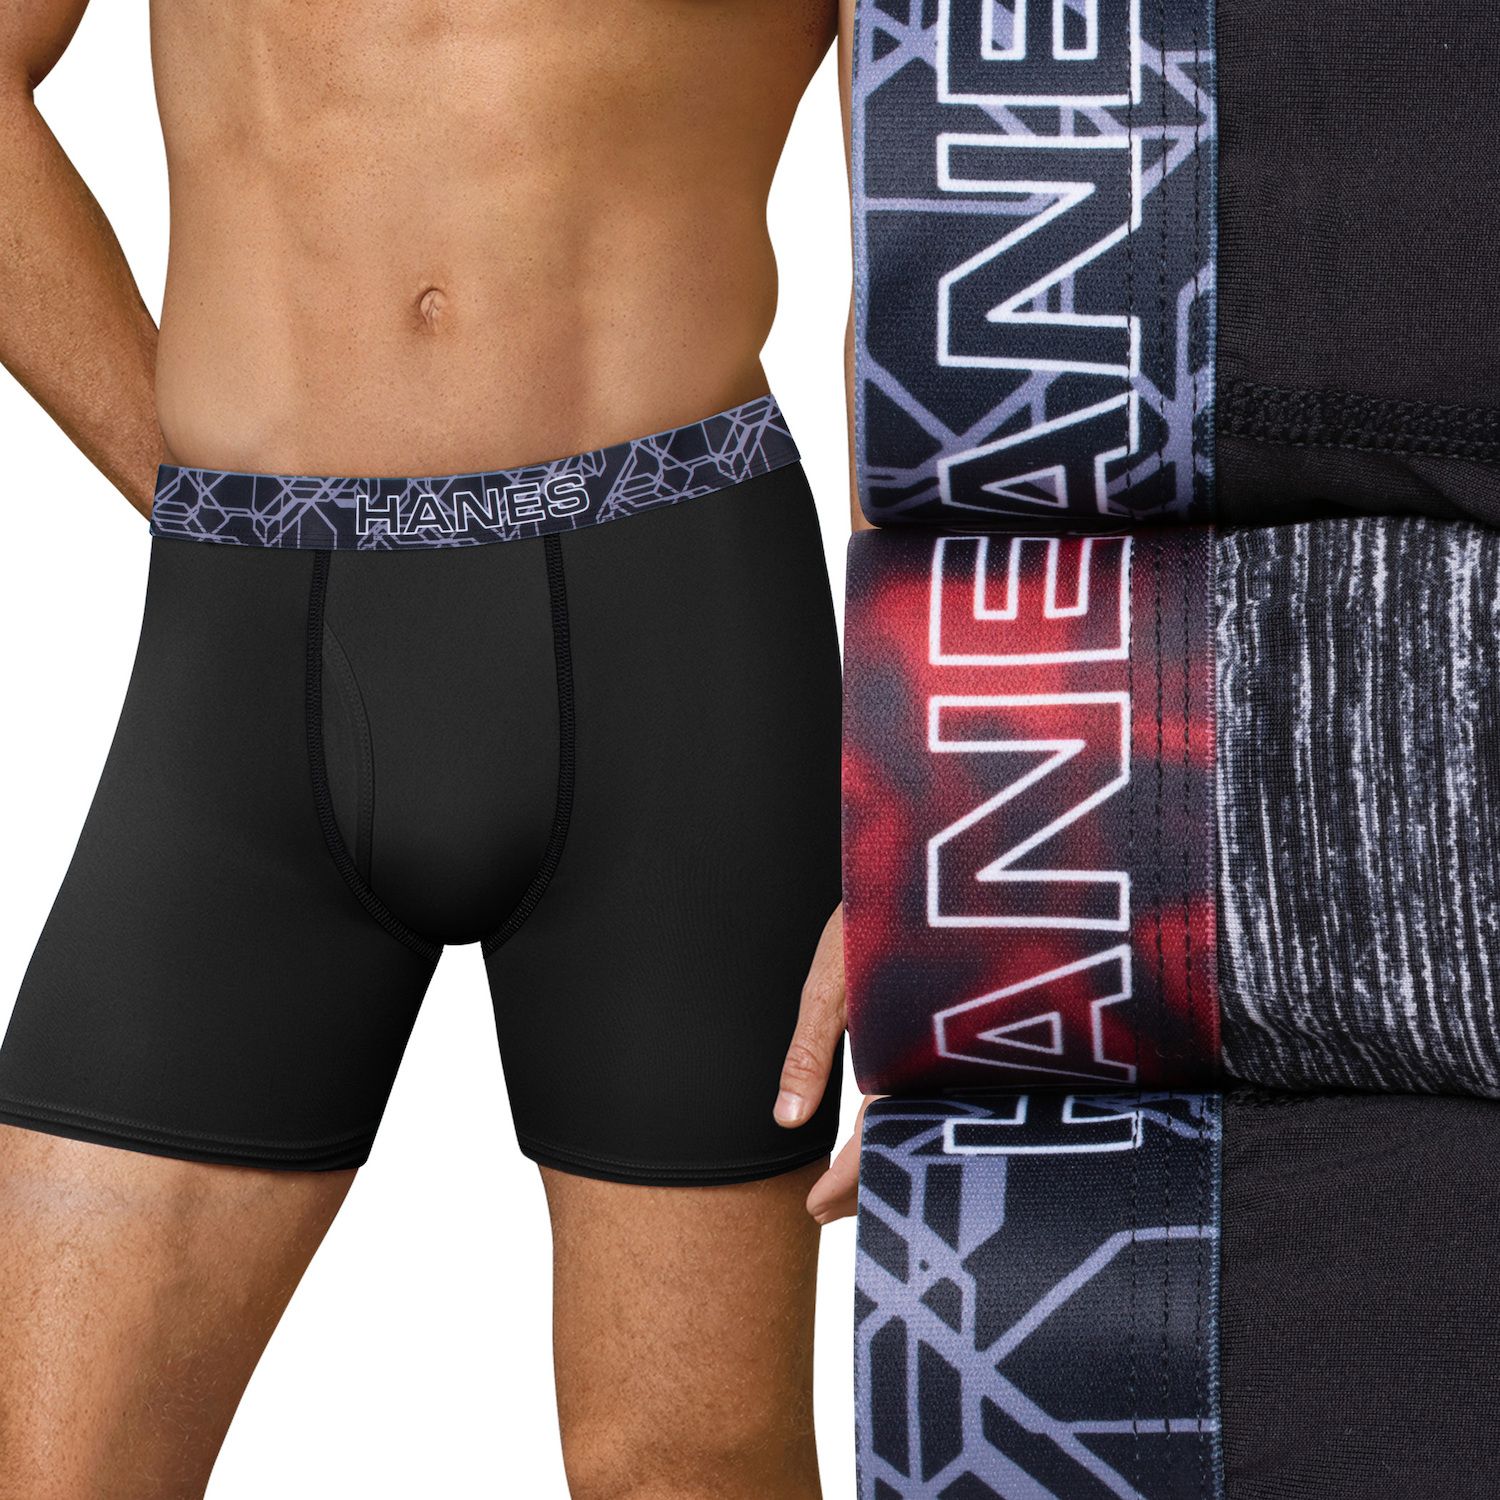 Image for Hanes Men's Big & Tall 3-pack Sport X-Temp 2.0 Performance Boxer Briefs 2XL at Kohl's.